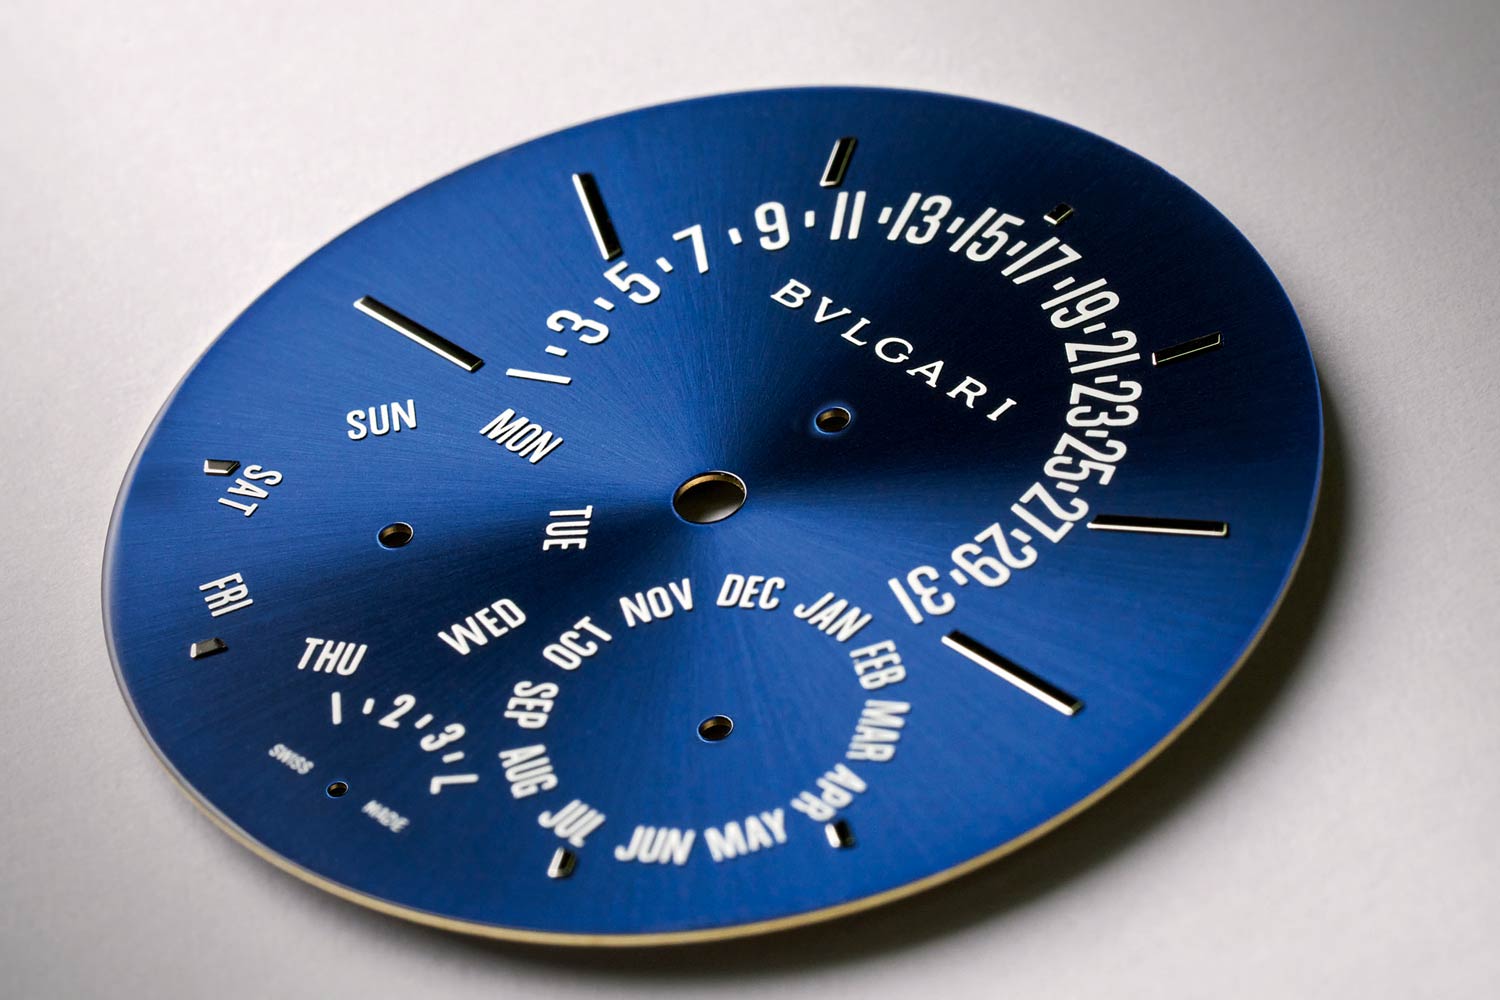 Legibility and a distinct visual identity are key considerations in the design of the dial